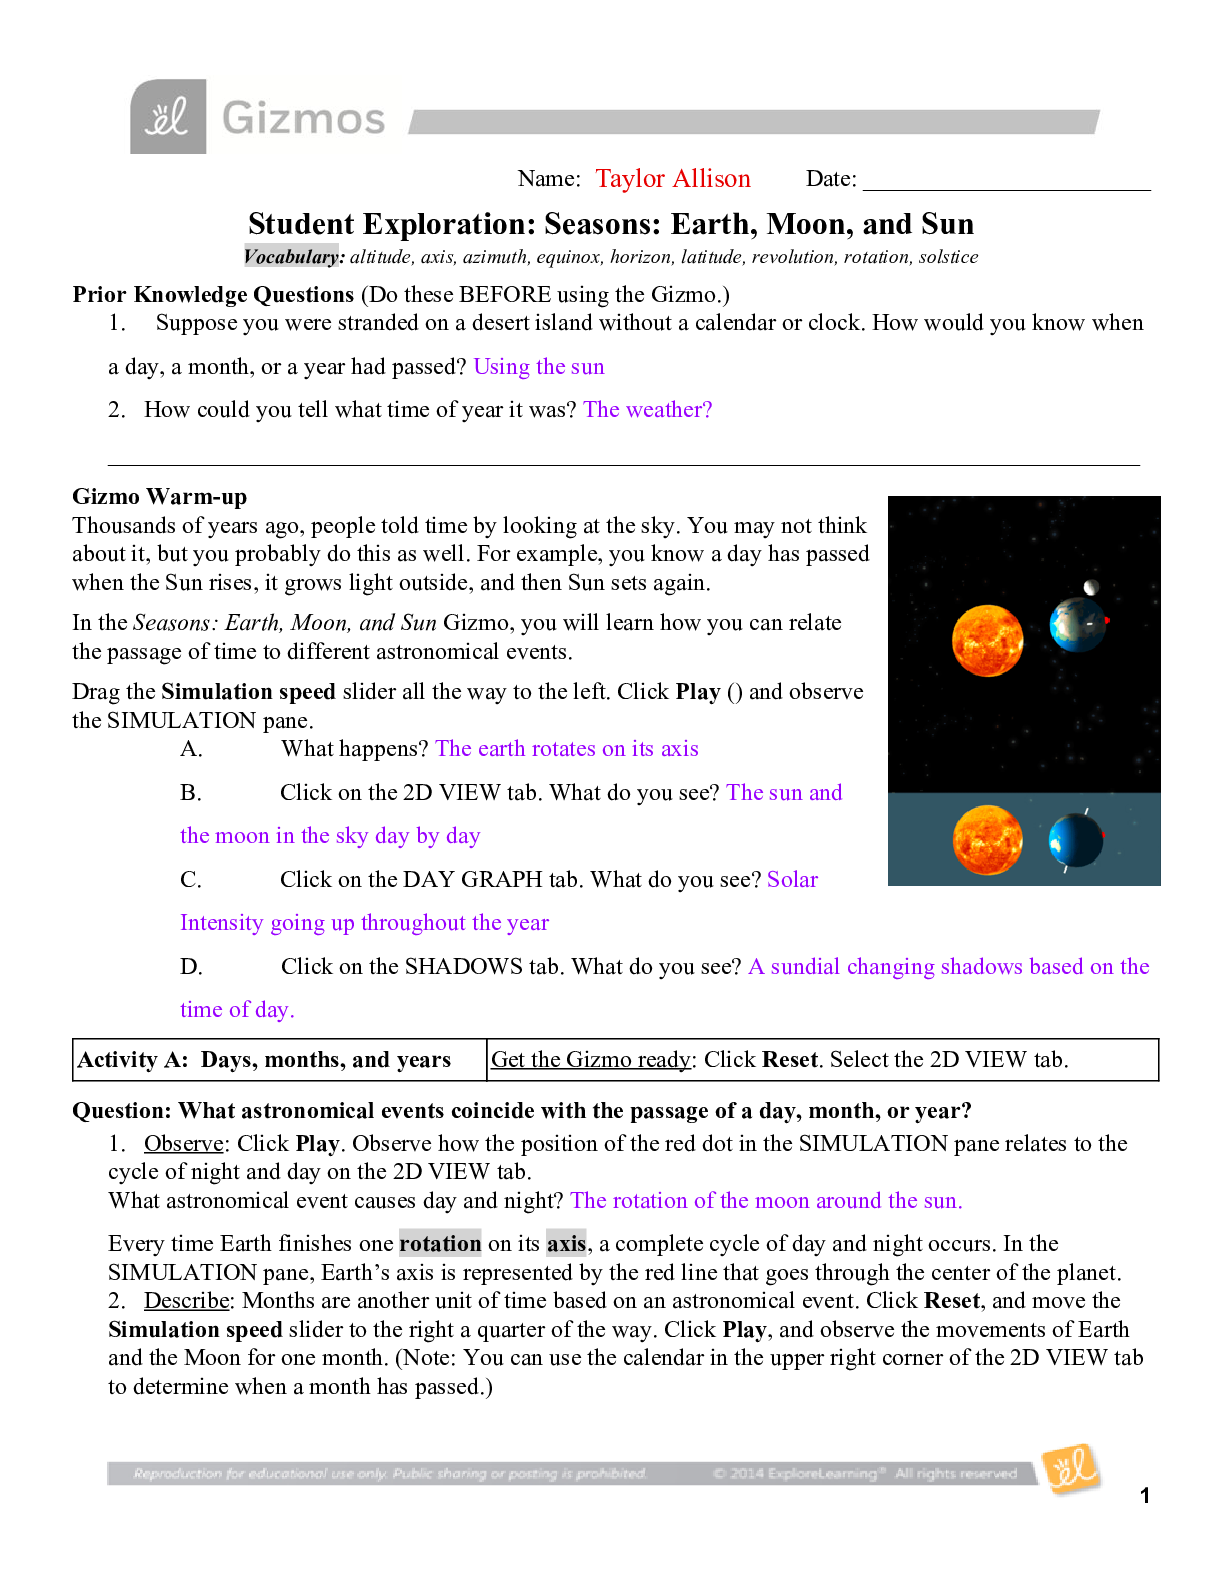 gizmos-seasons-earth-moon-and-sun-updated-answer-key-2022